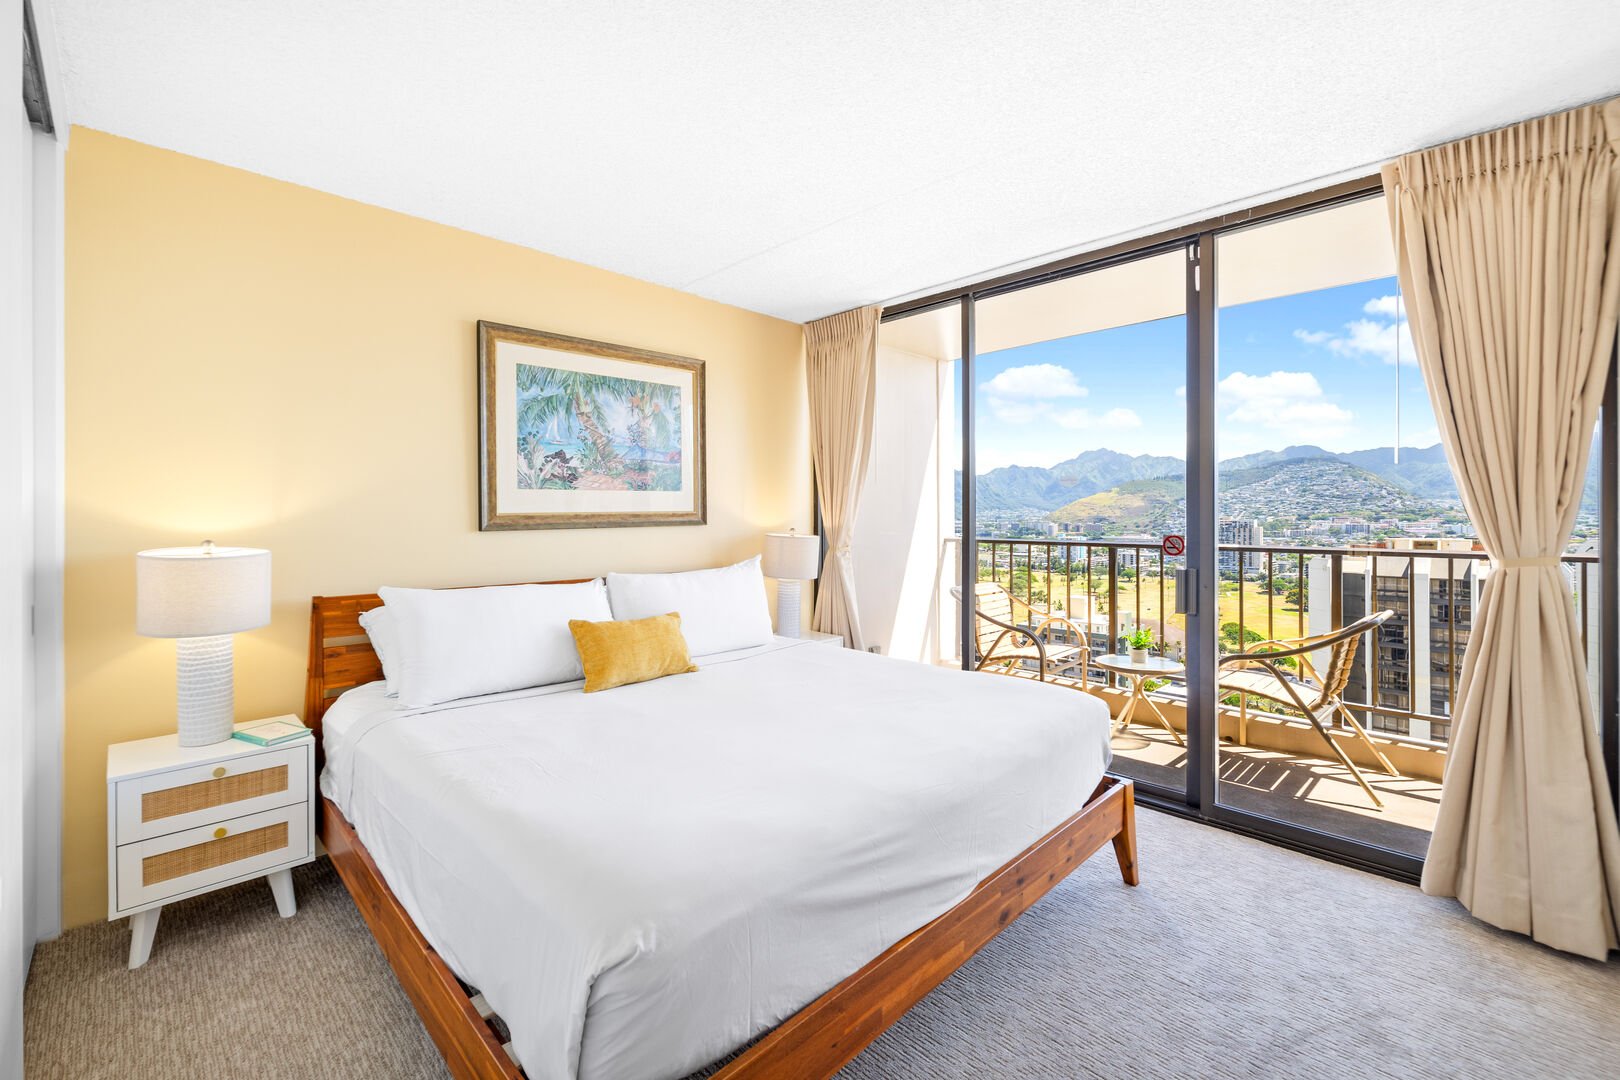 The bedroom has a king-size bed and a beautiful view!